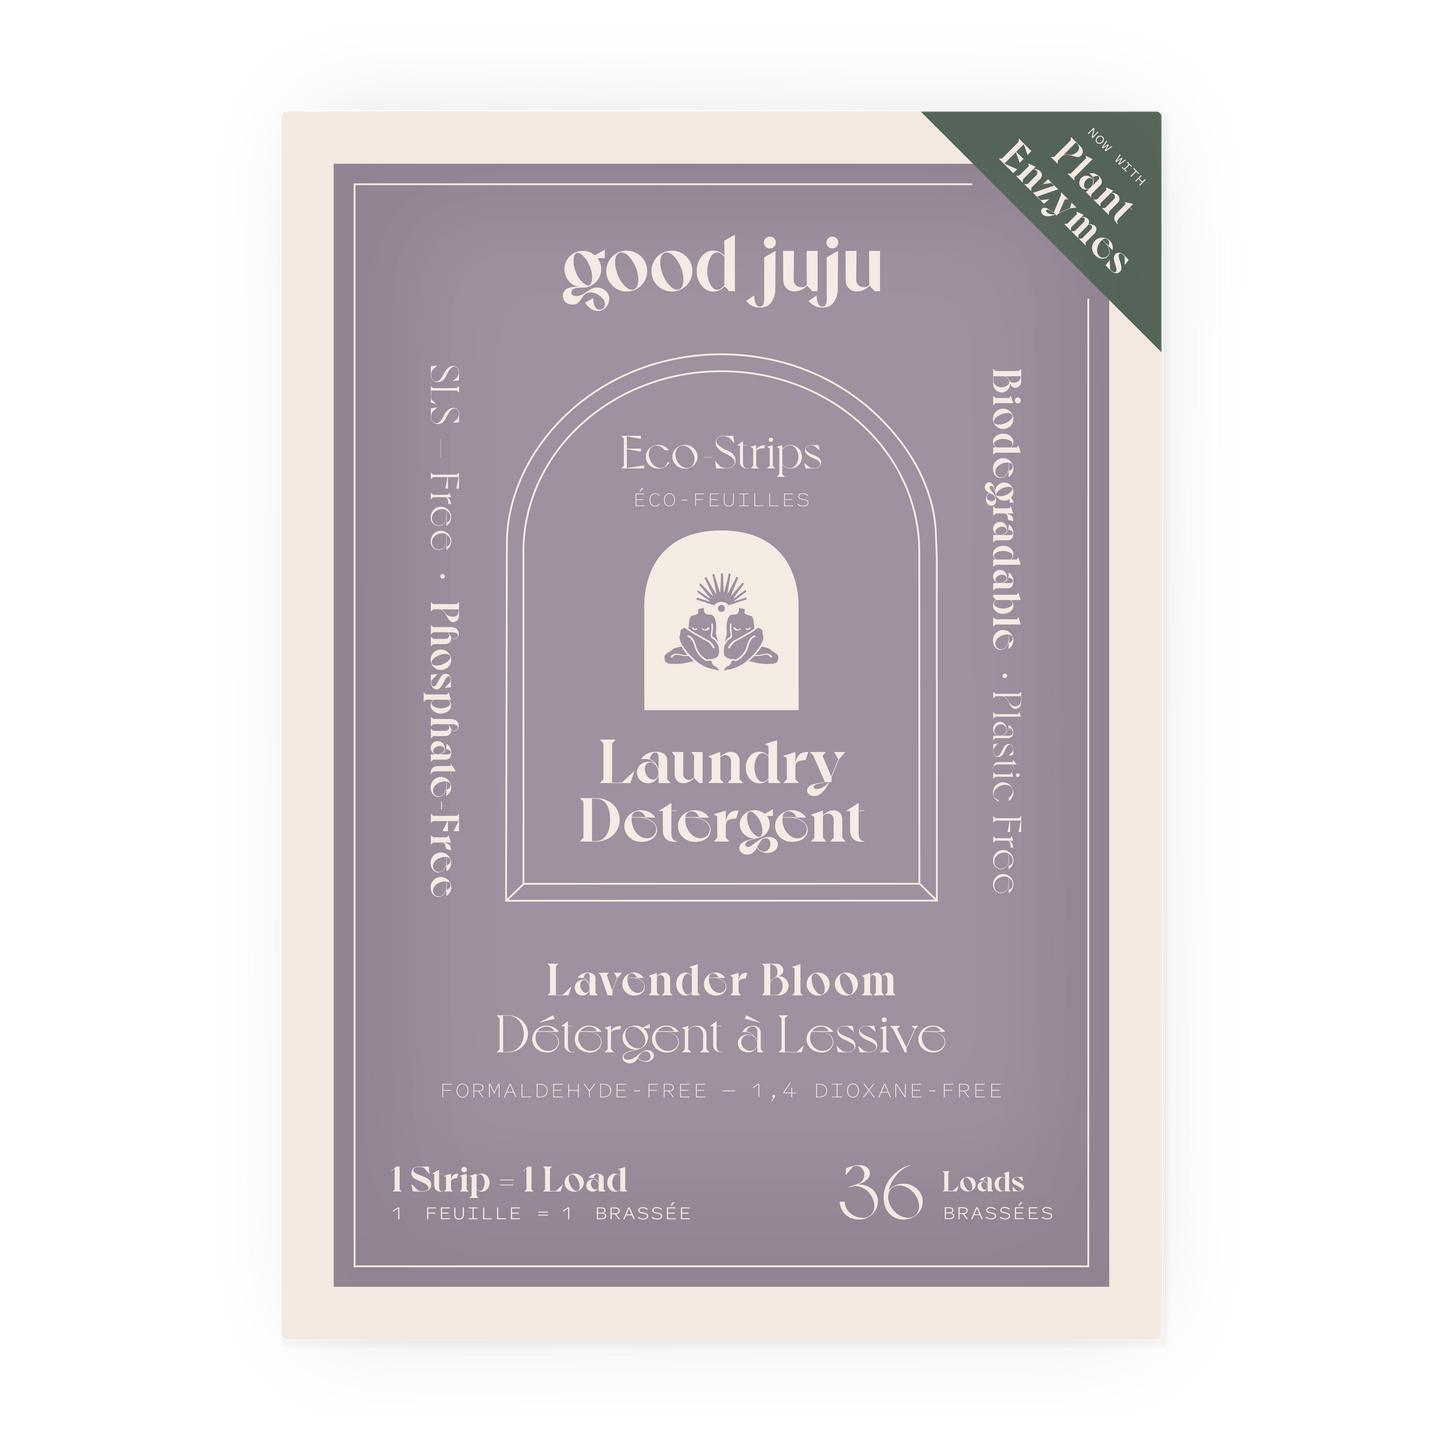 Good Juju Body & Home - Laundry Detergent Eco-Strips Lavender Bloom